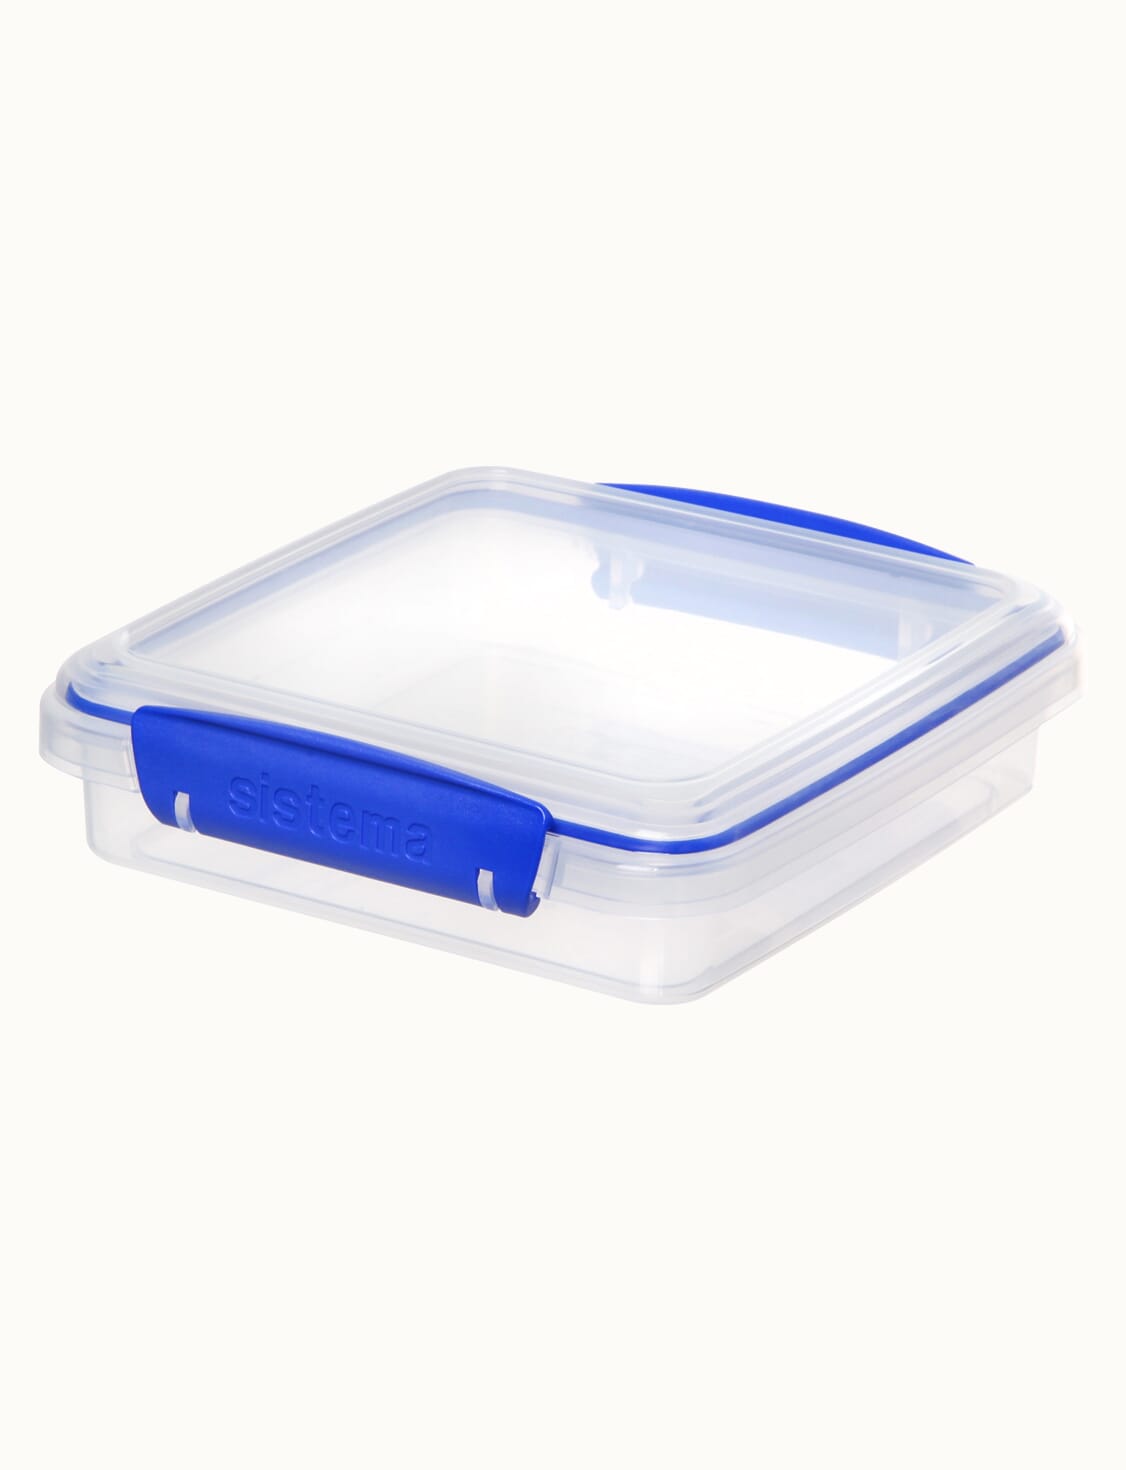  Sistema 450ml Sandwich Box to Go, One Box (Colors May Vary) :  Home & Kitchen